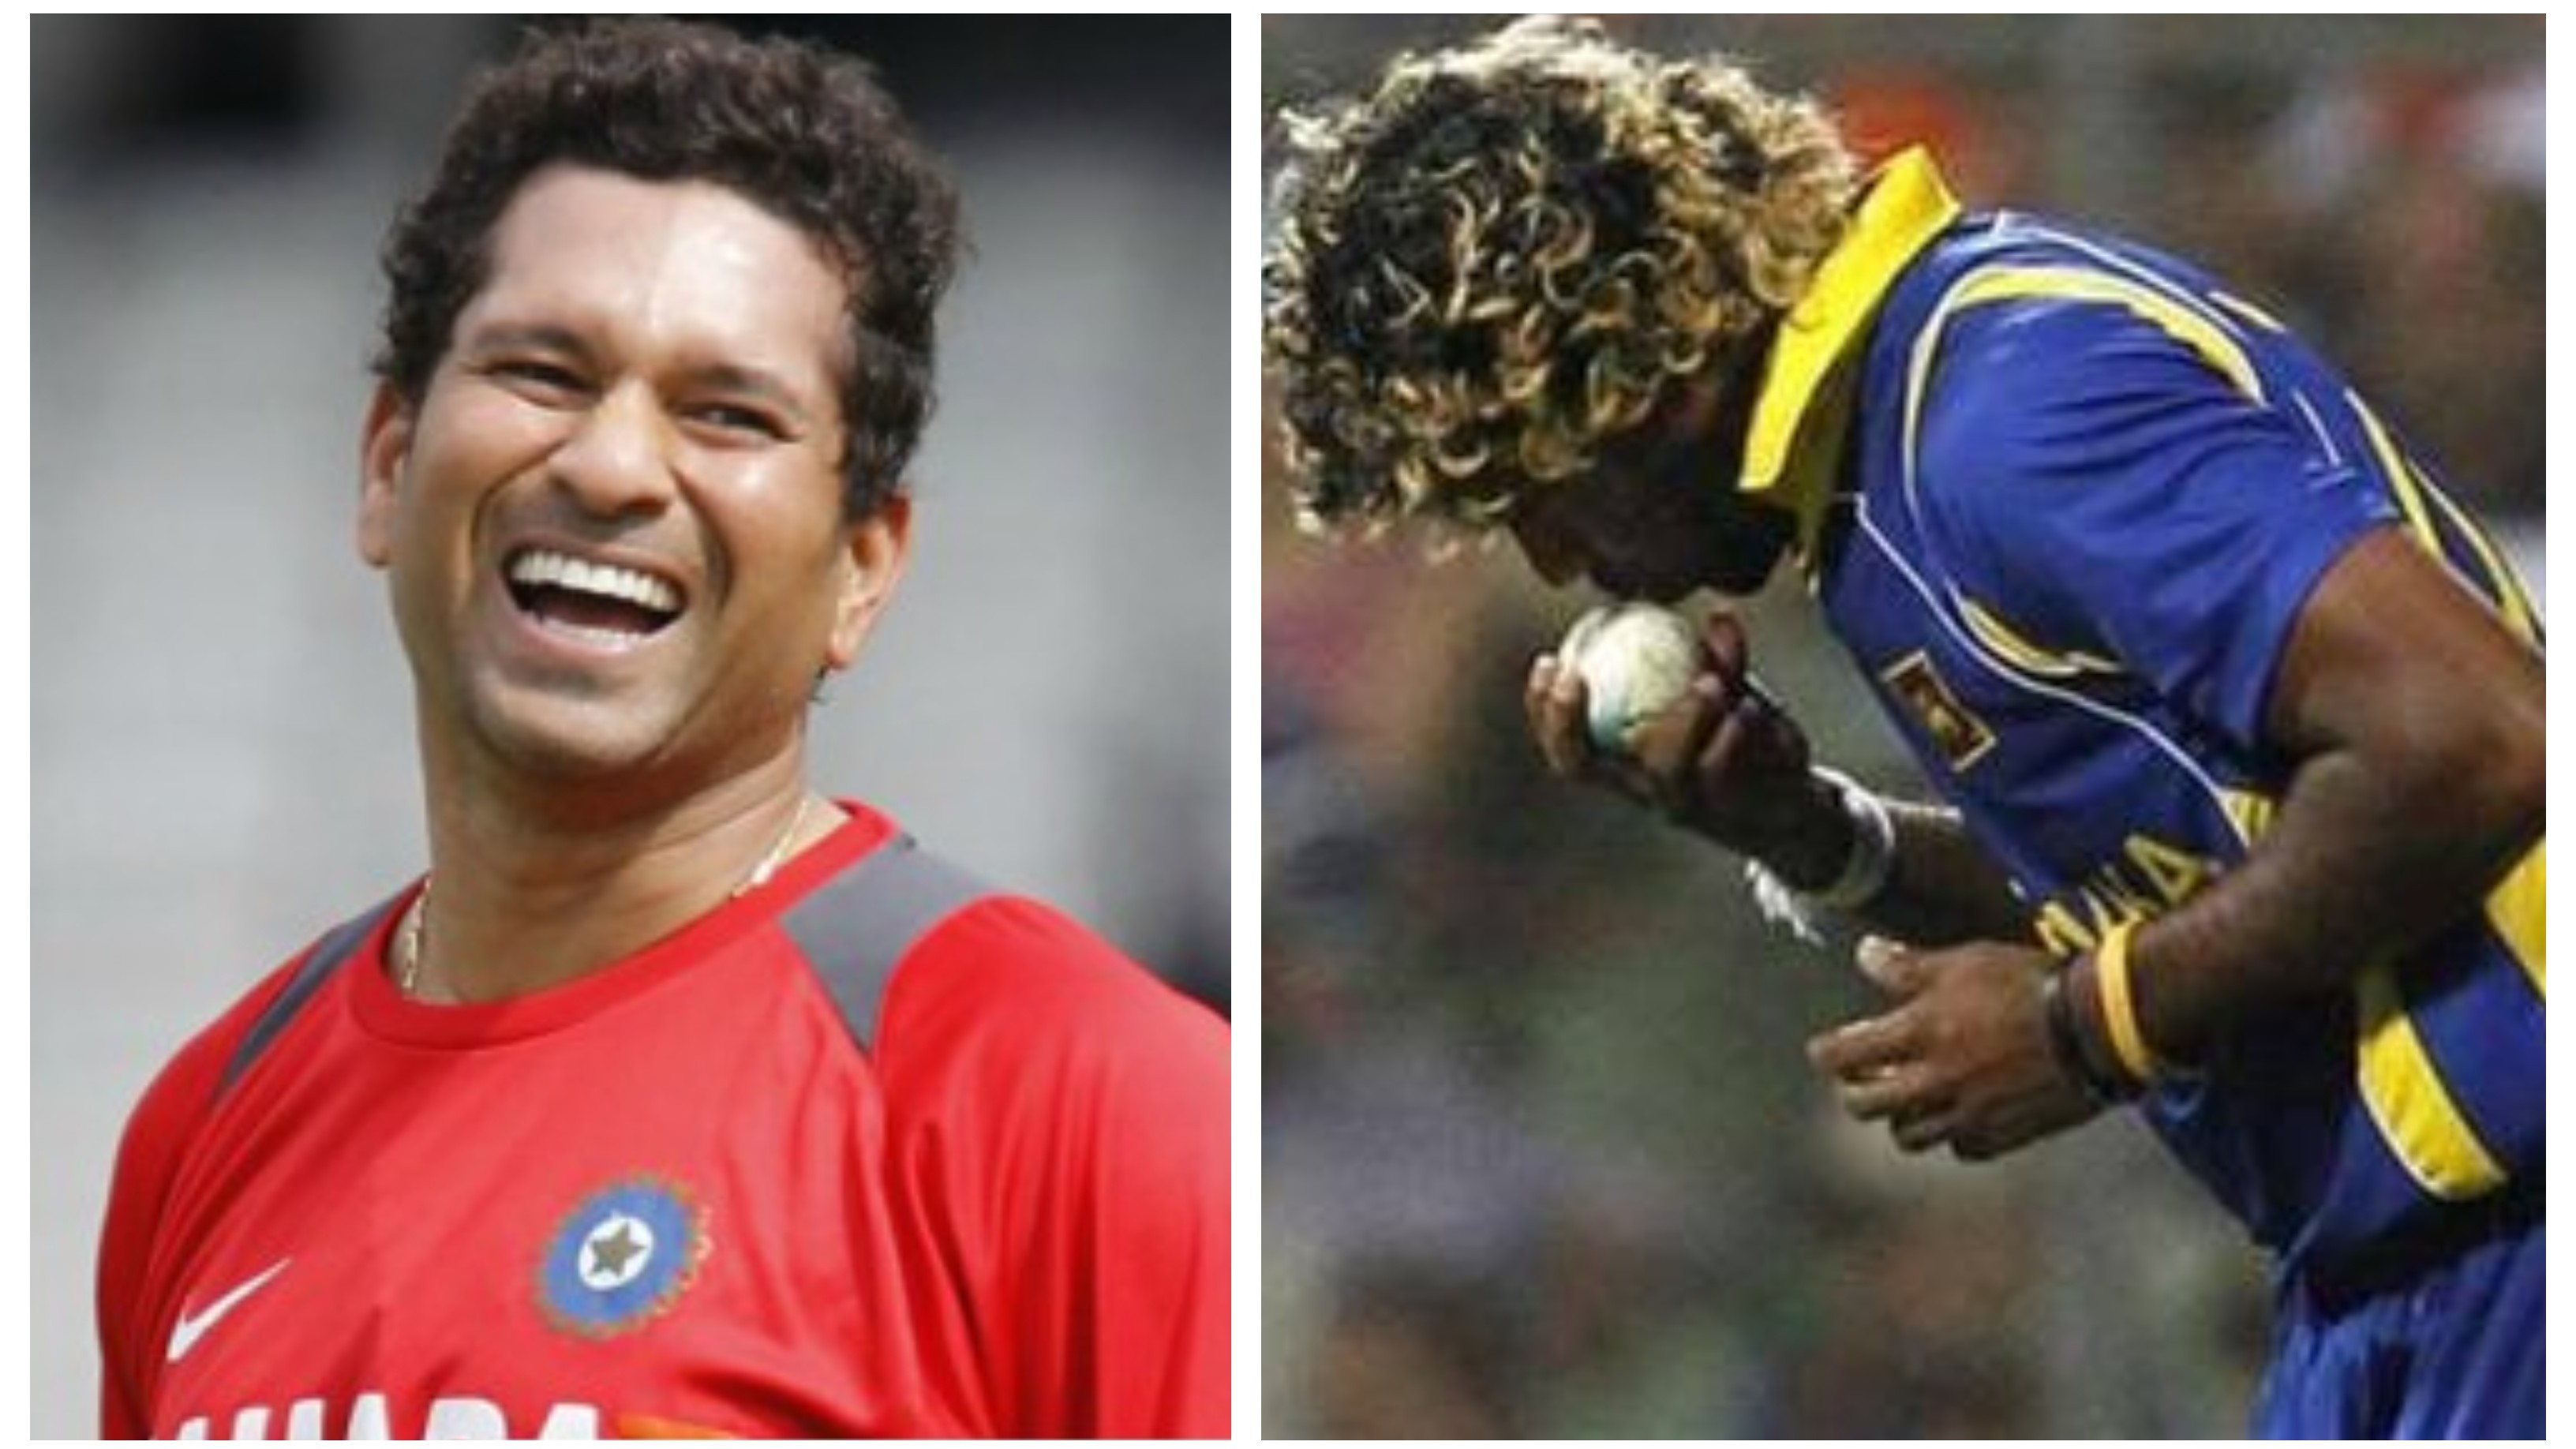 Tendulkar thinks Malinga will have to change his run-up routine with new ICC rules in place